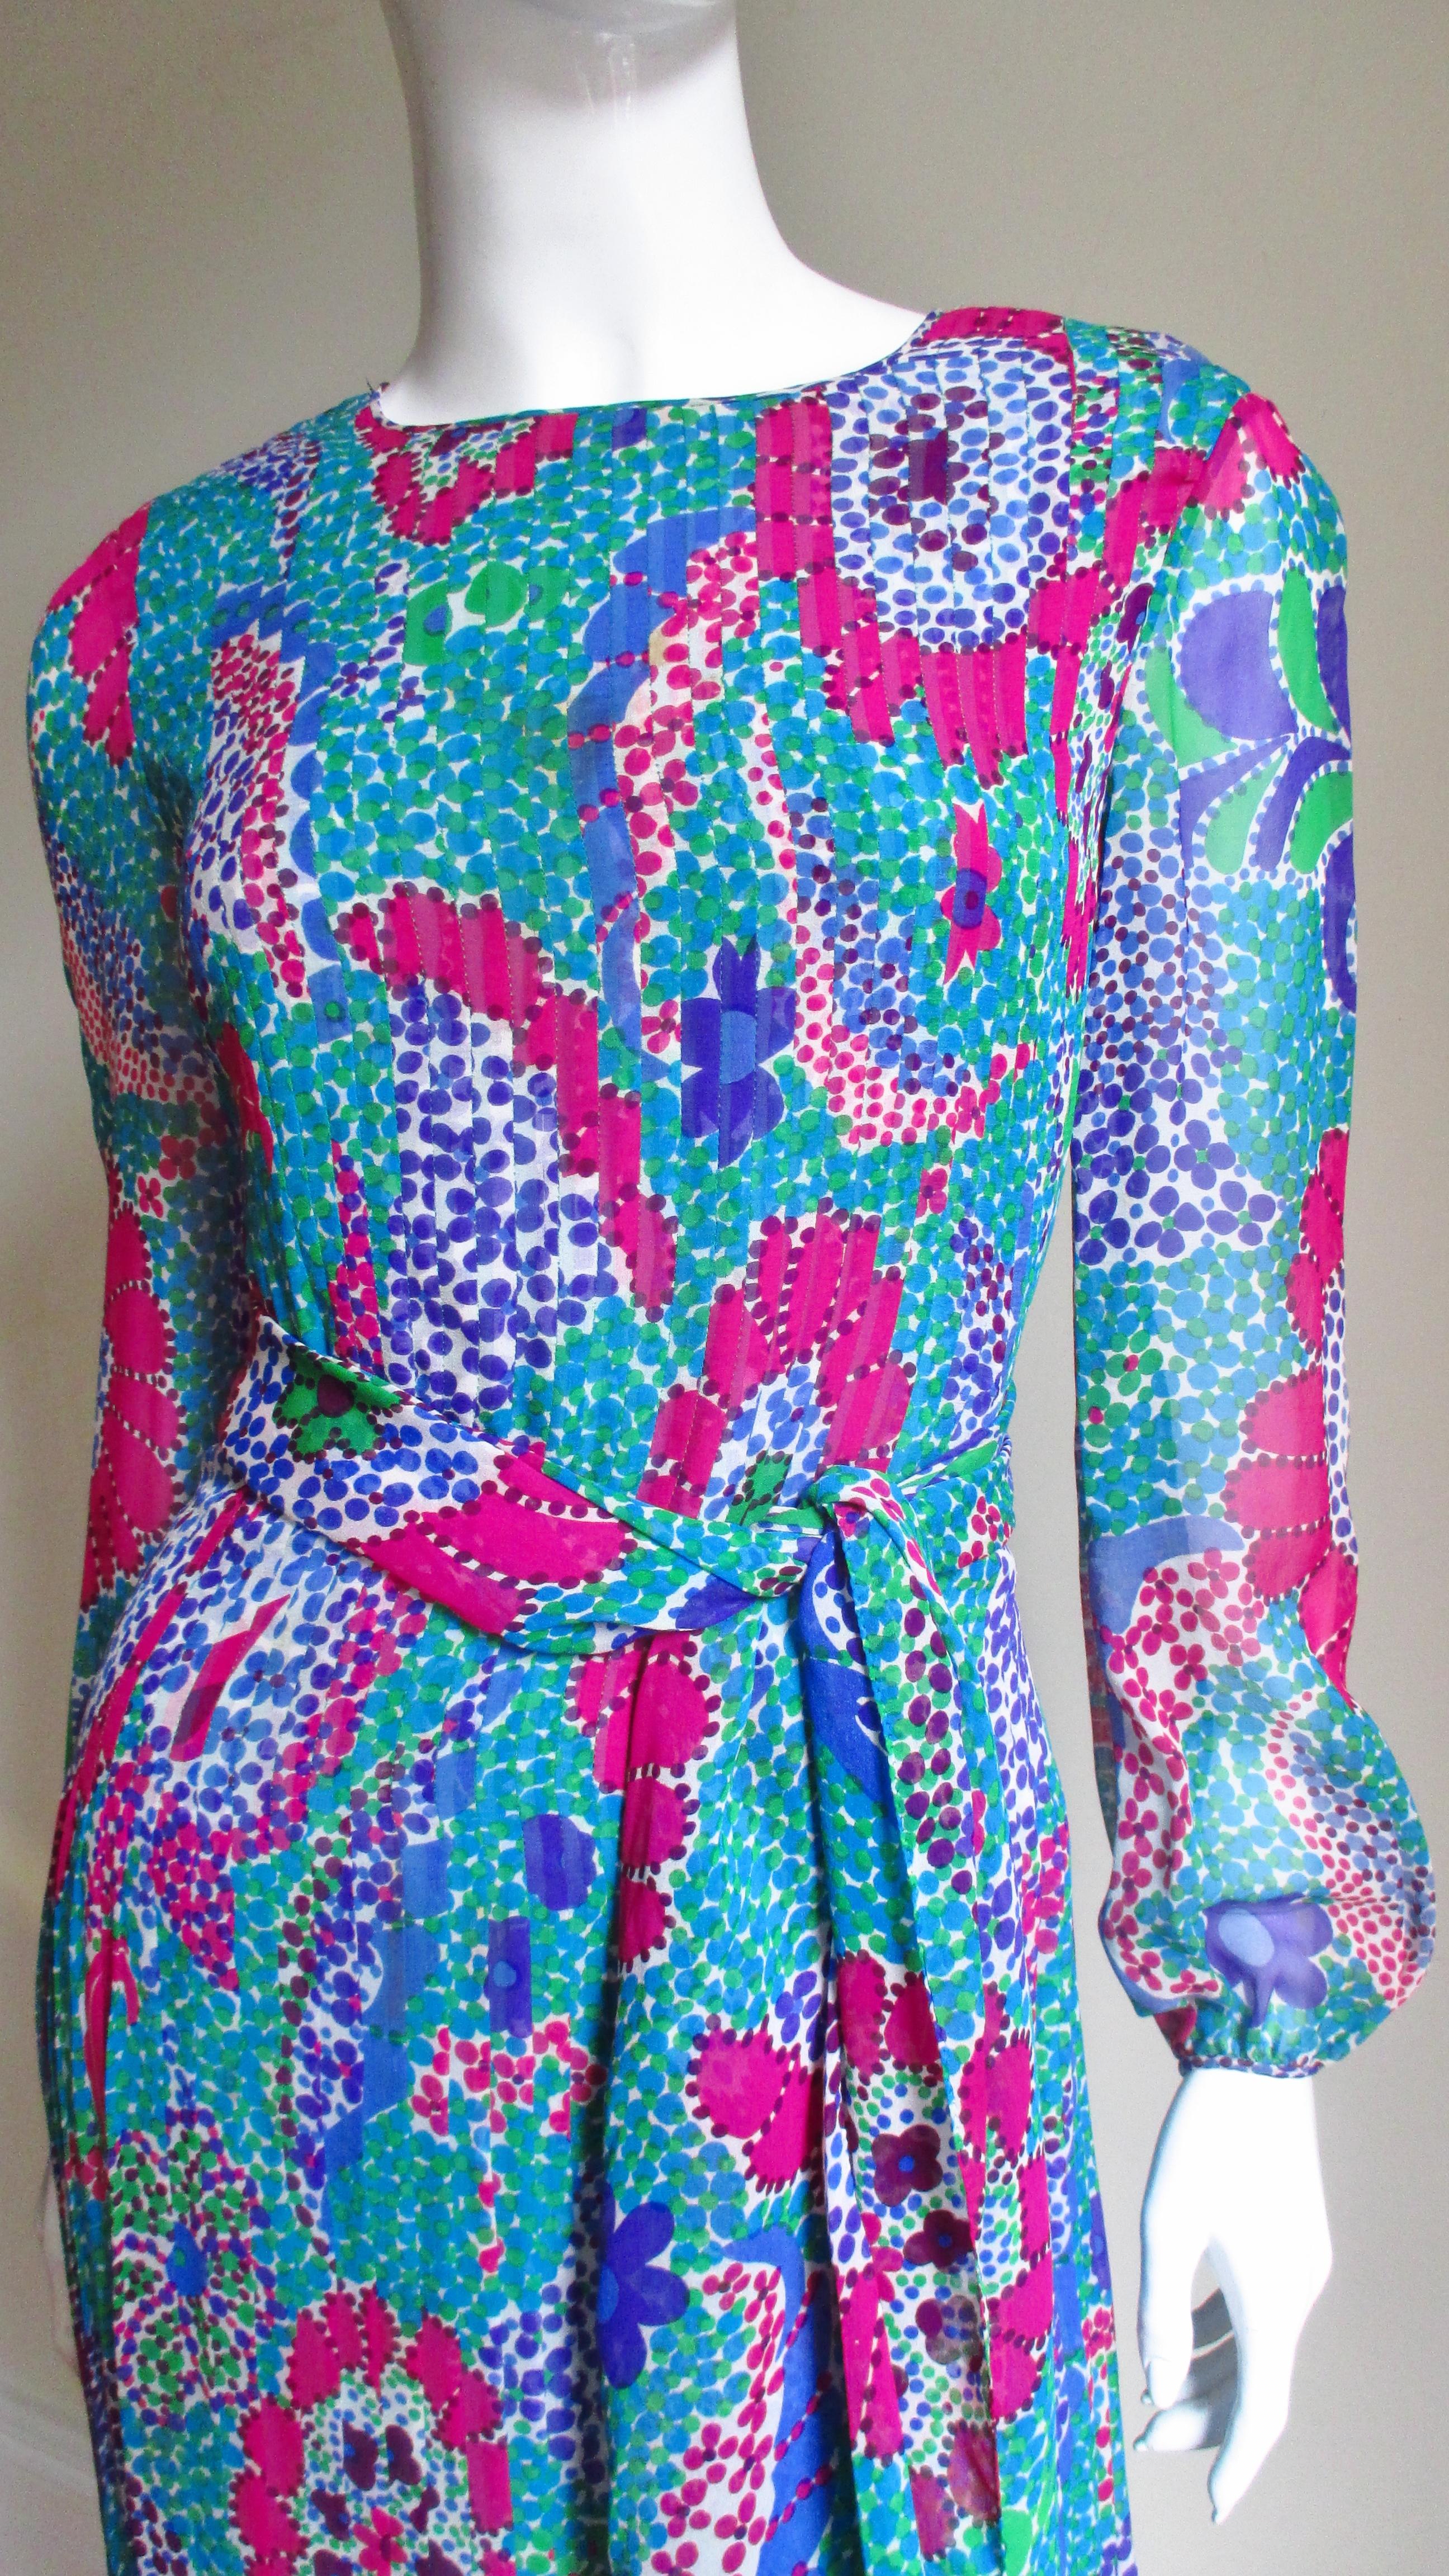 Pierre Cardin 1960s Silk Dress In Good Condition For Sale In Water Mill, NY